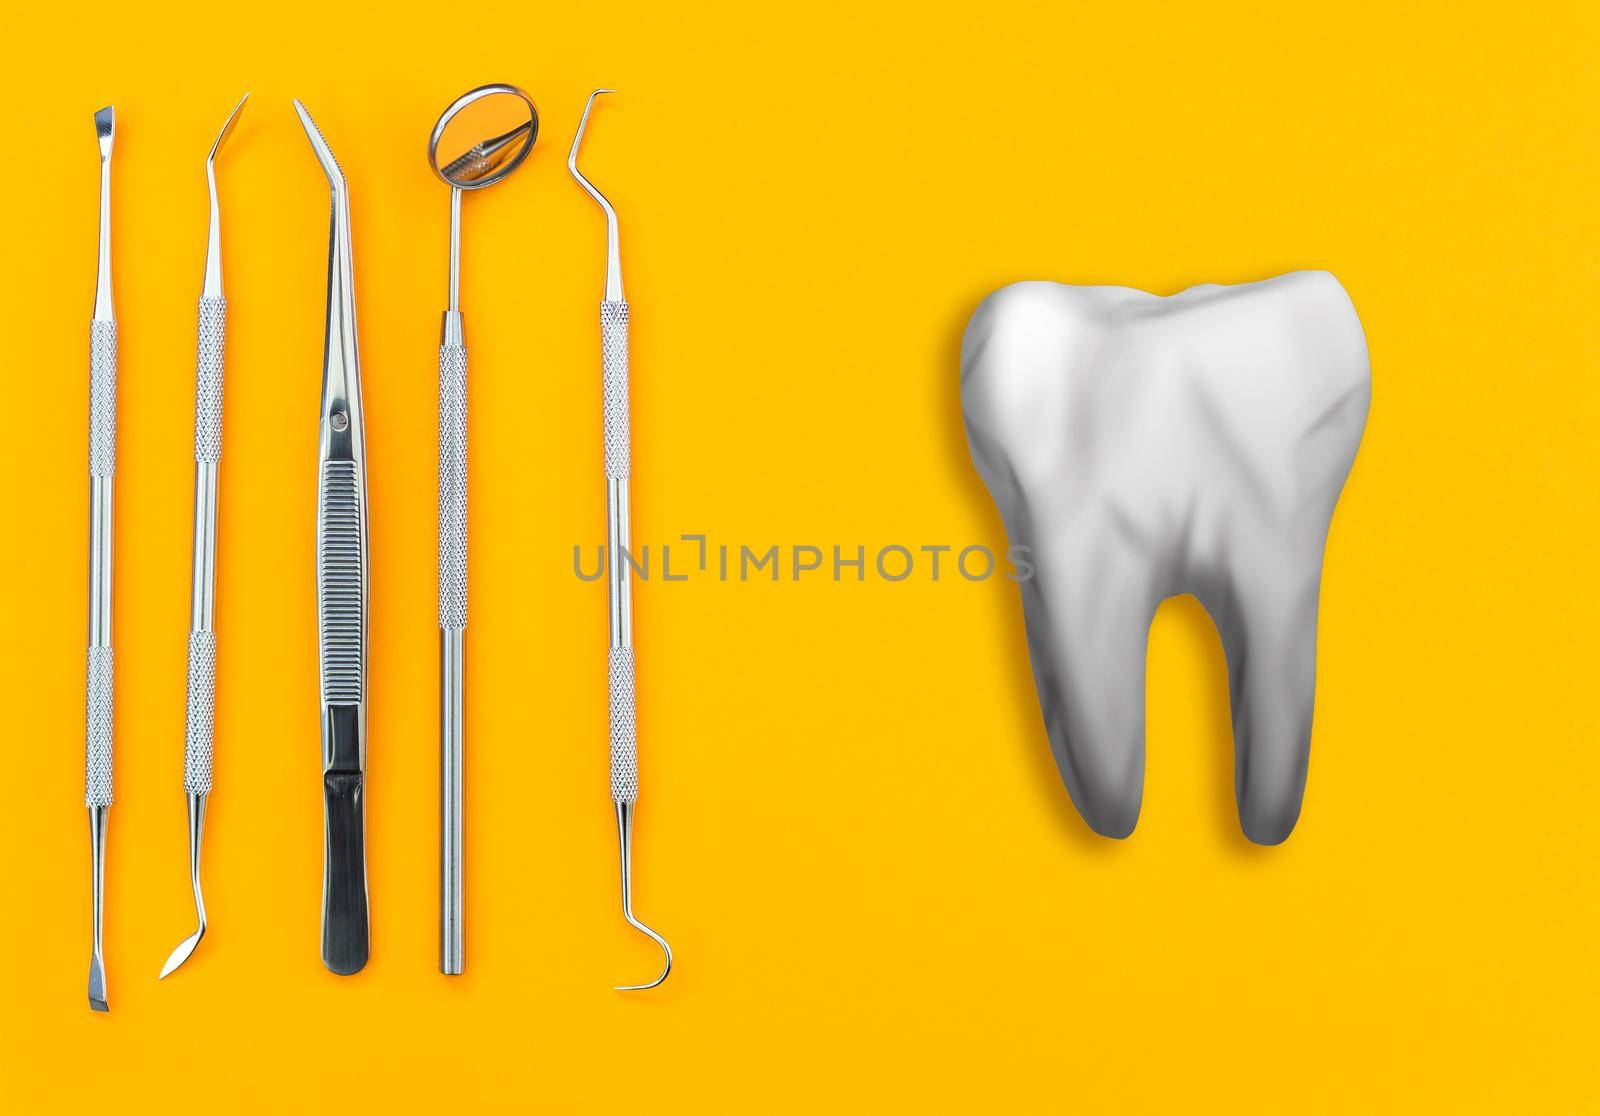 Artificial tooth and dental instrument on table. Dental services concept.